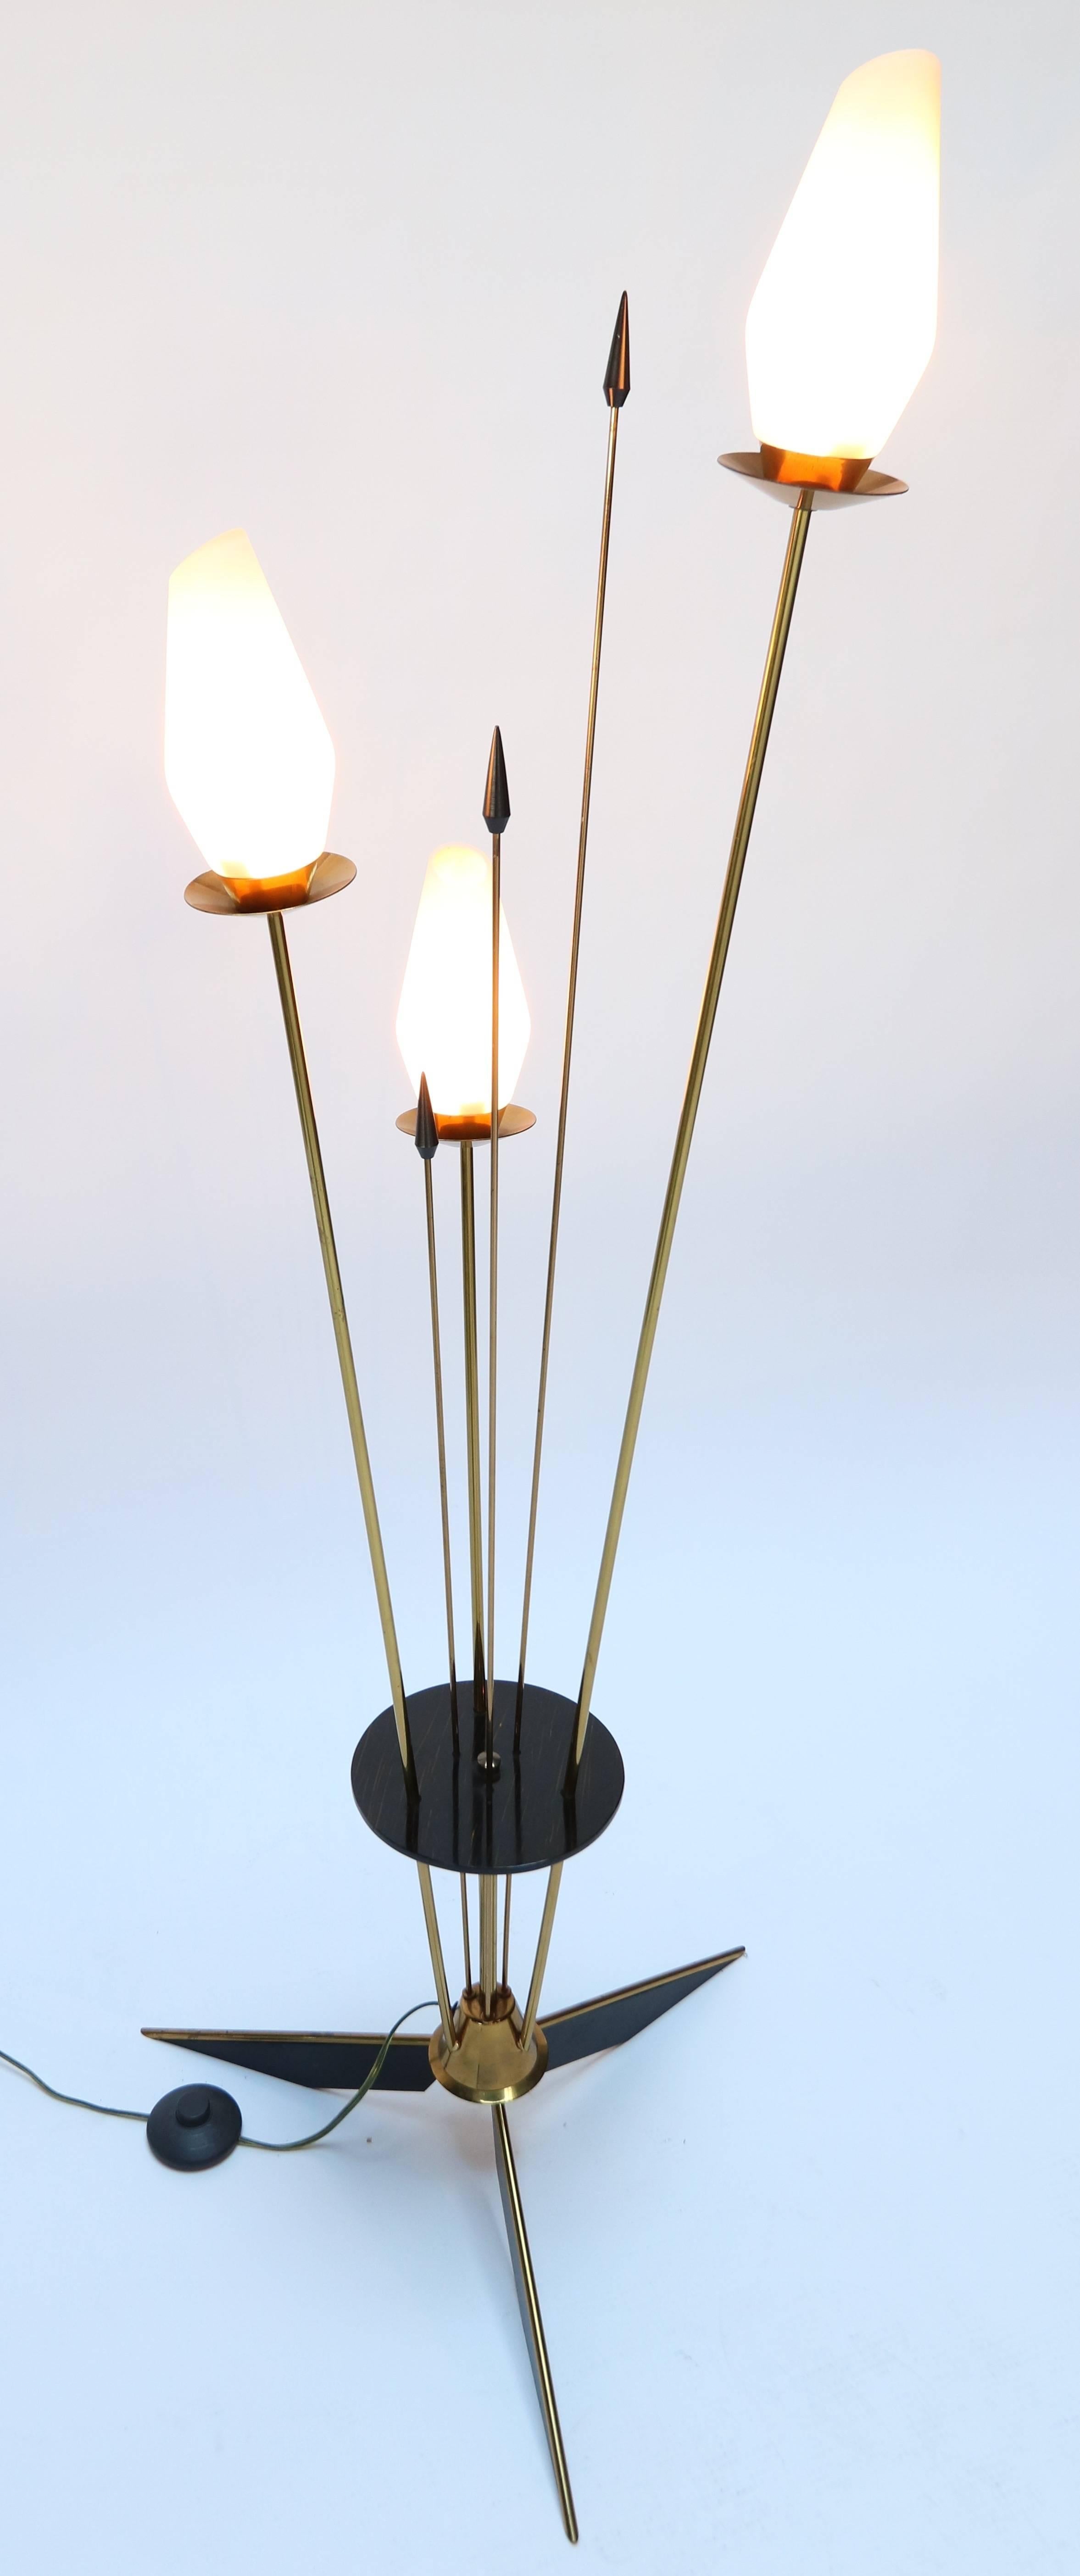 French Brass and Black Metal Floor Lamp with 3 Opaque White Glass Lights, 1950s For Sale 2